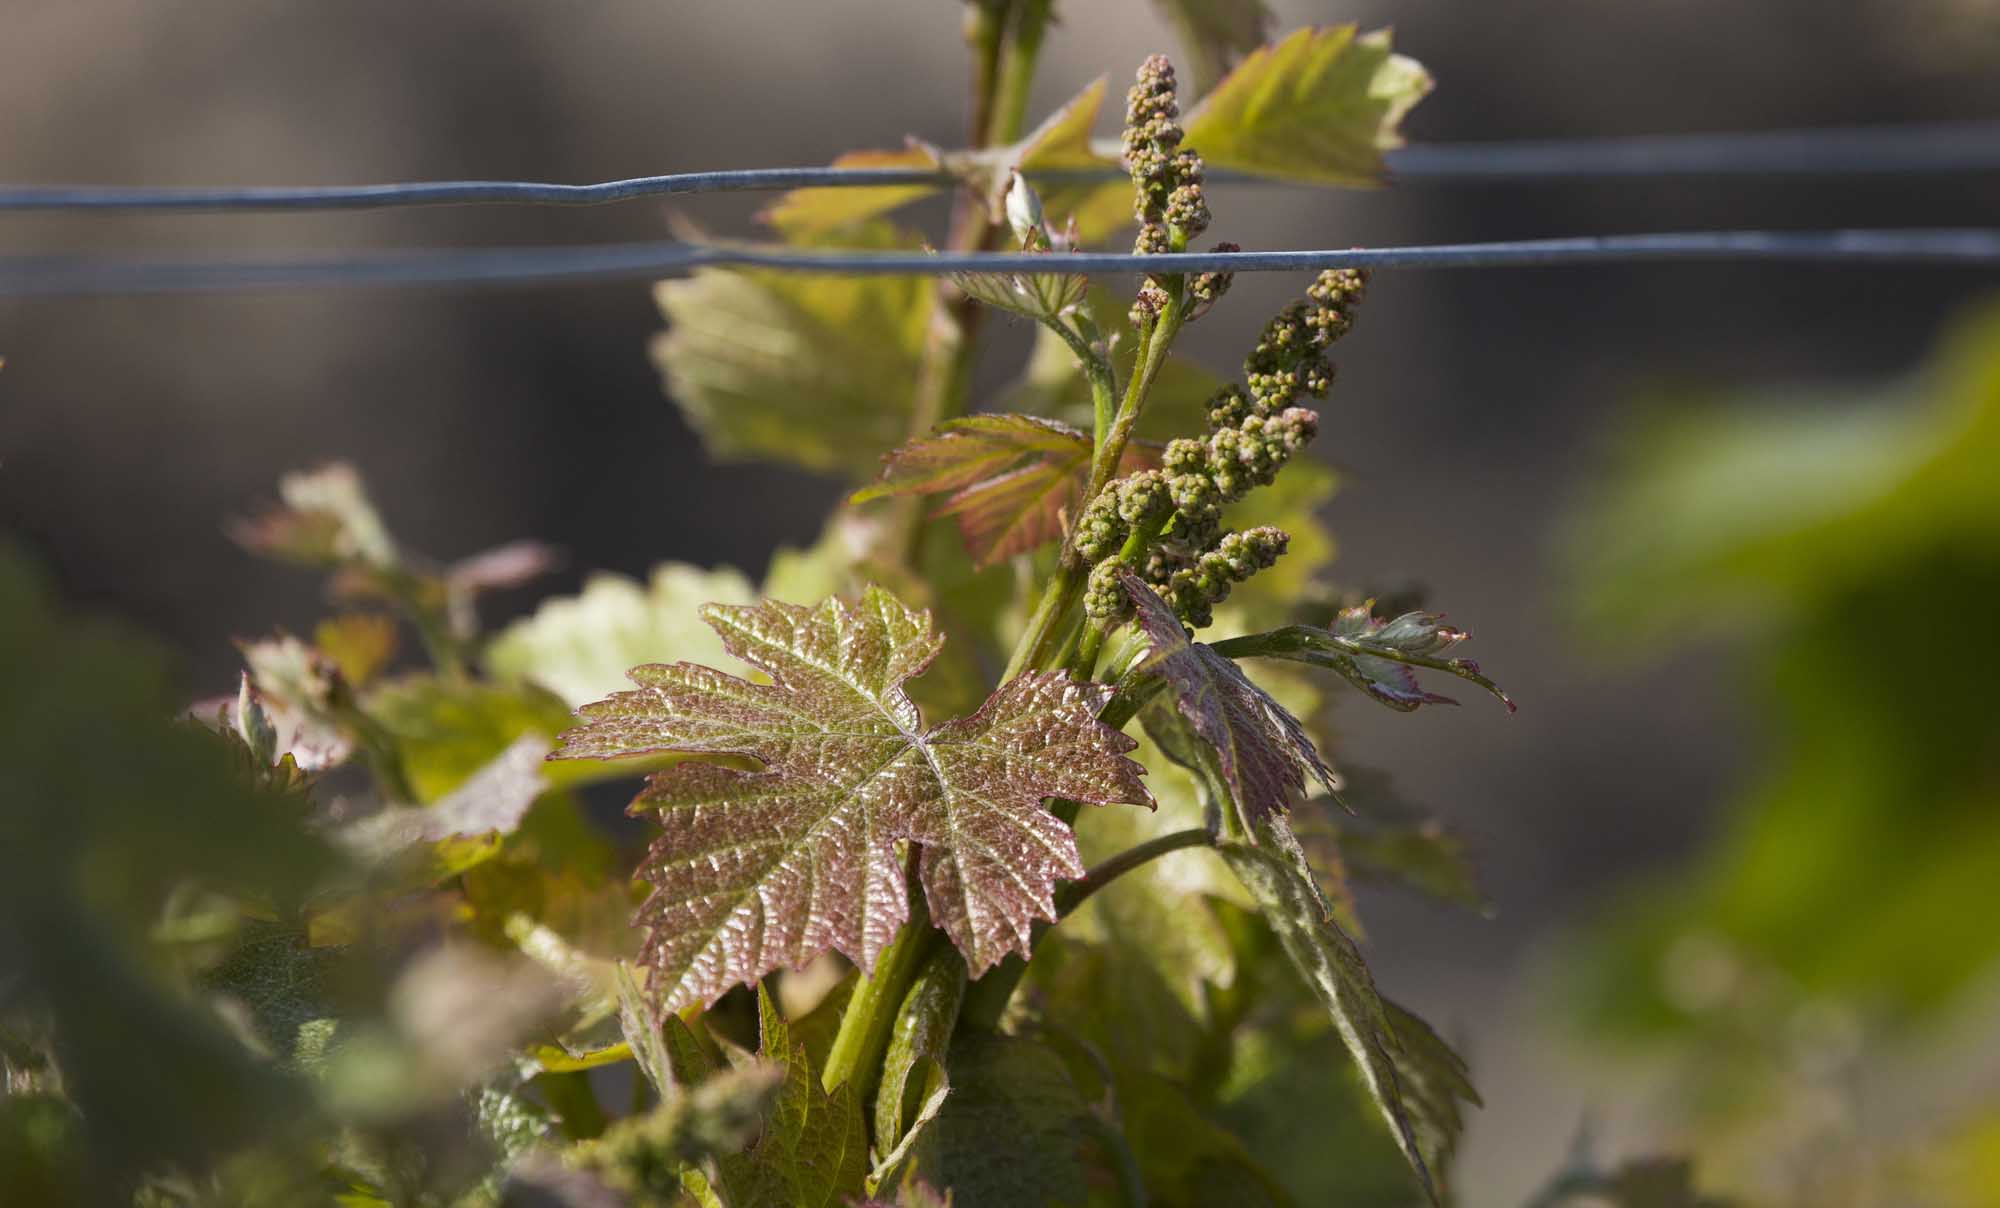 Airfield Estates owner, Marcus Miller, says the Dolcetto wine grape variety consistently produces high quality wines. Miller points out Dolcetto has a distinctive reddening on the leaf and requires heavy thinning in the late spring. (TJ Mullinax/Good Fruit Grower)